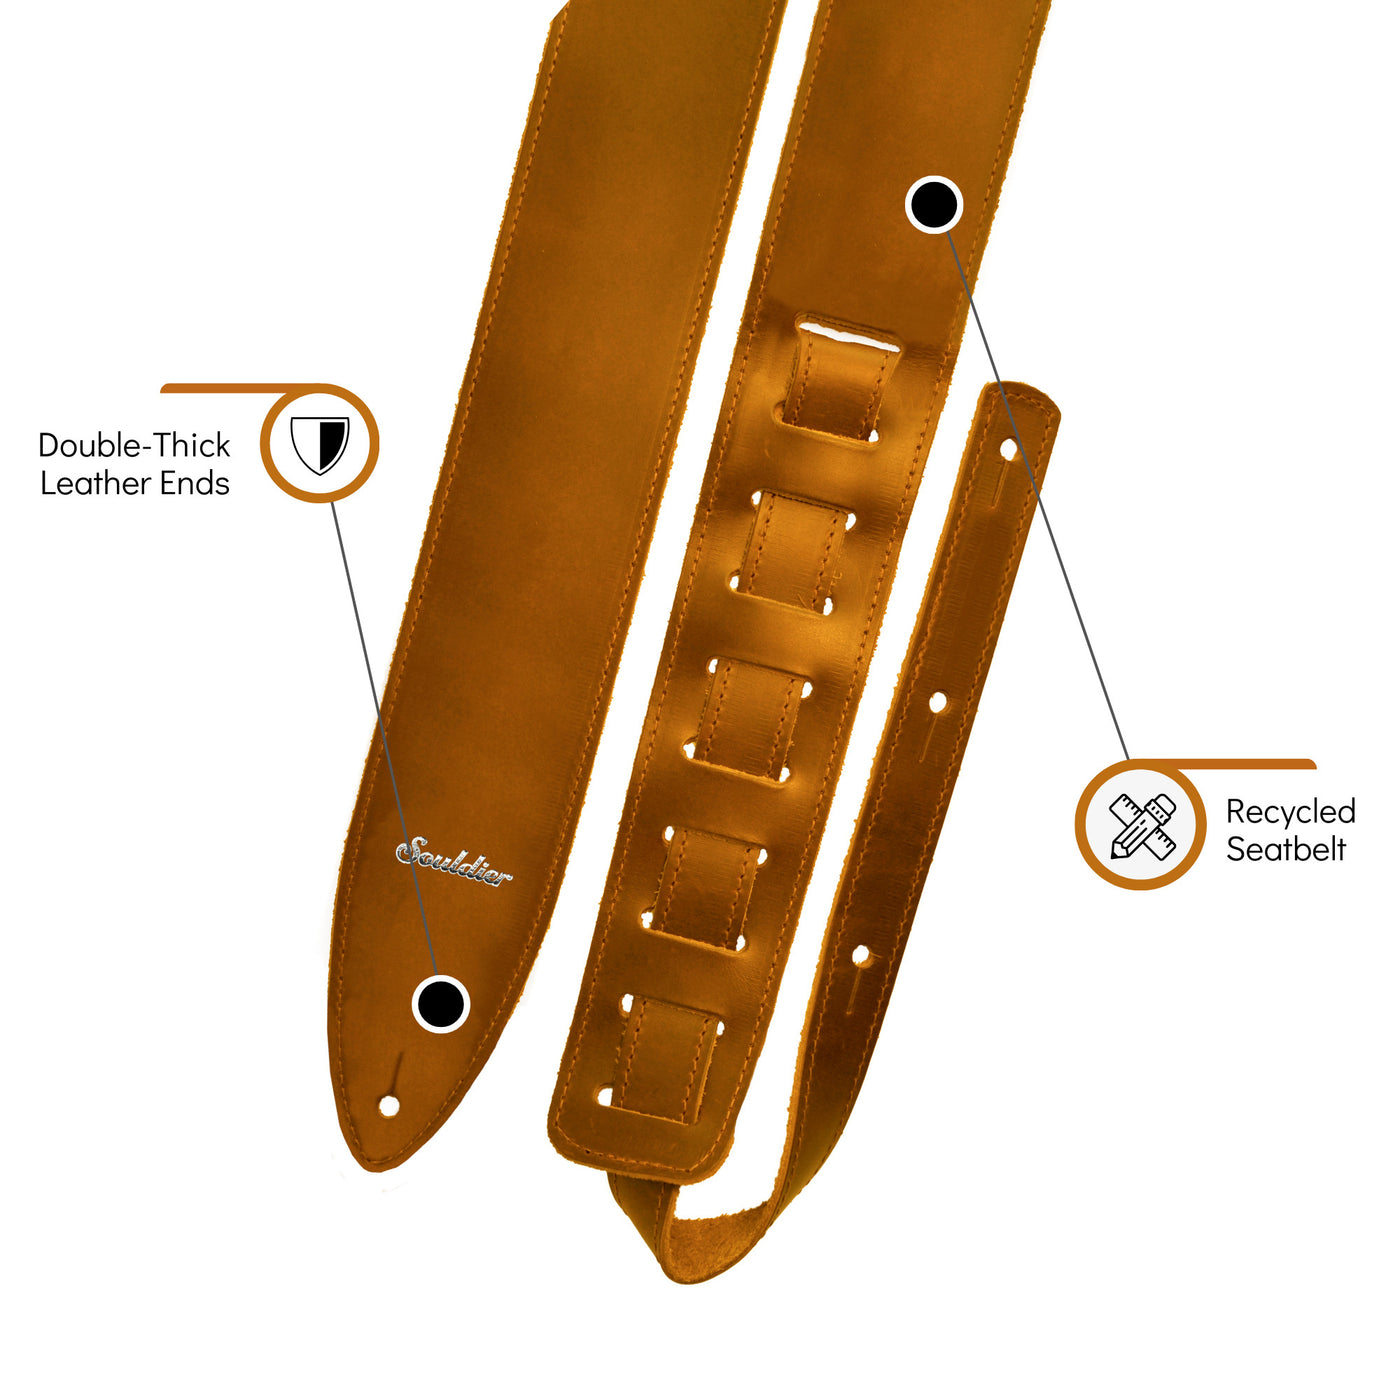 Souldier TGS0000TN02TN - Handmade Souldier Solid Torpedo Strap for Bass, Electric, or Acoustic Guitar, Adjustable Length from 42.5" to 55" Made in the USA, Tan